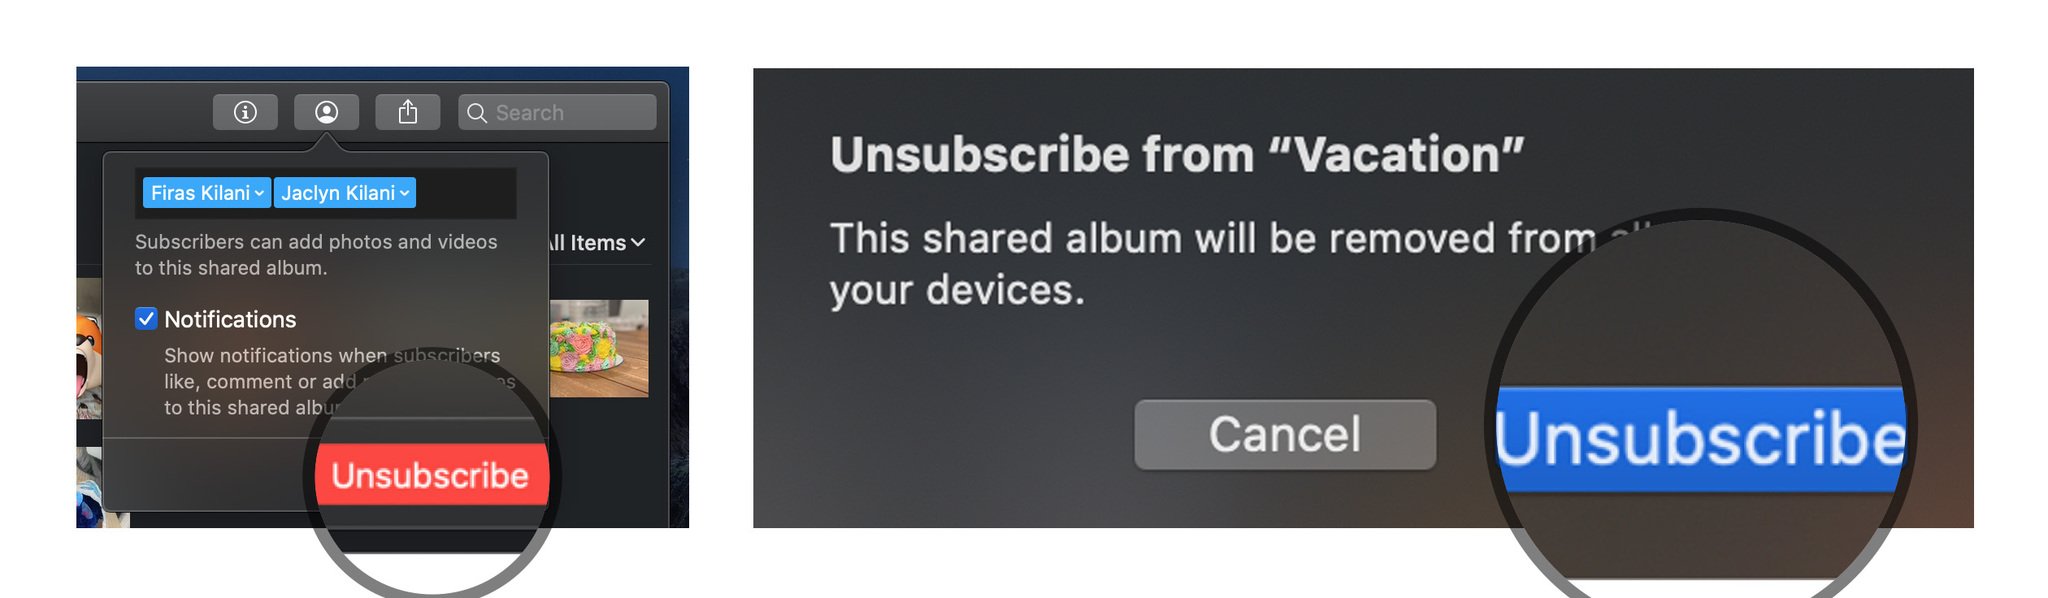 Unsubscribe from a Shared Photo Album on macOS by showing steps: Tap Usubscribe, Press Unsubscribe again